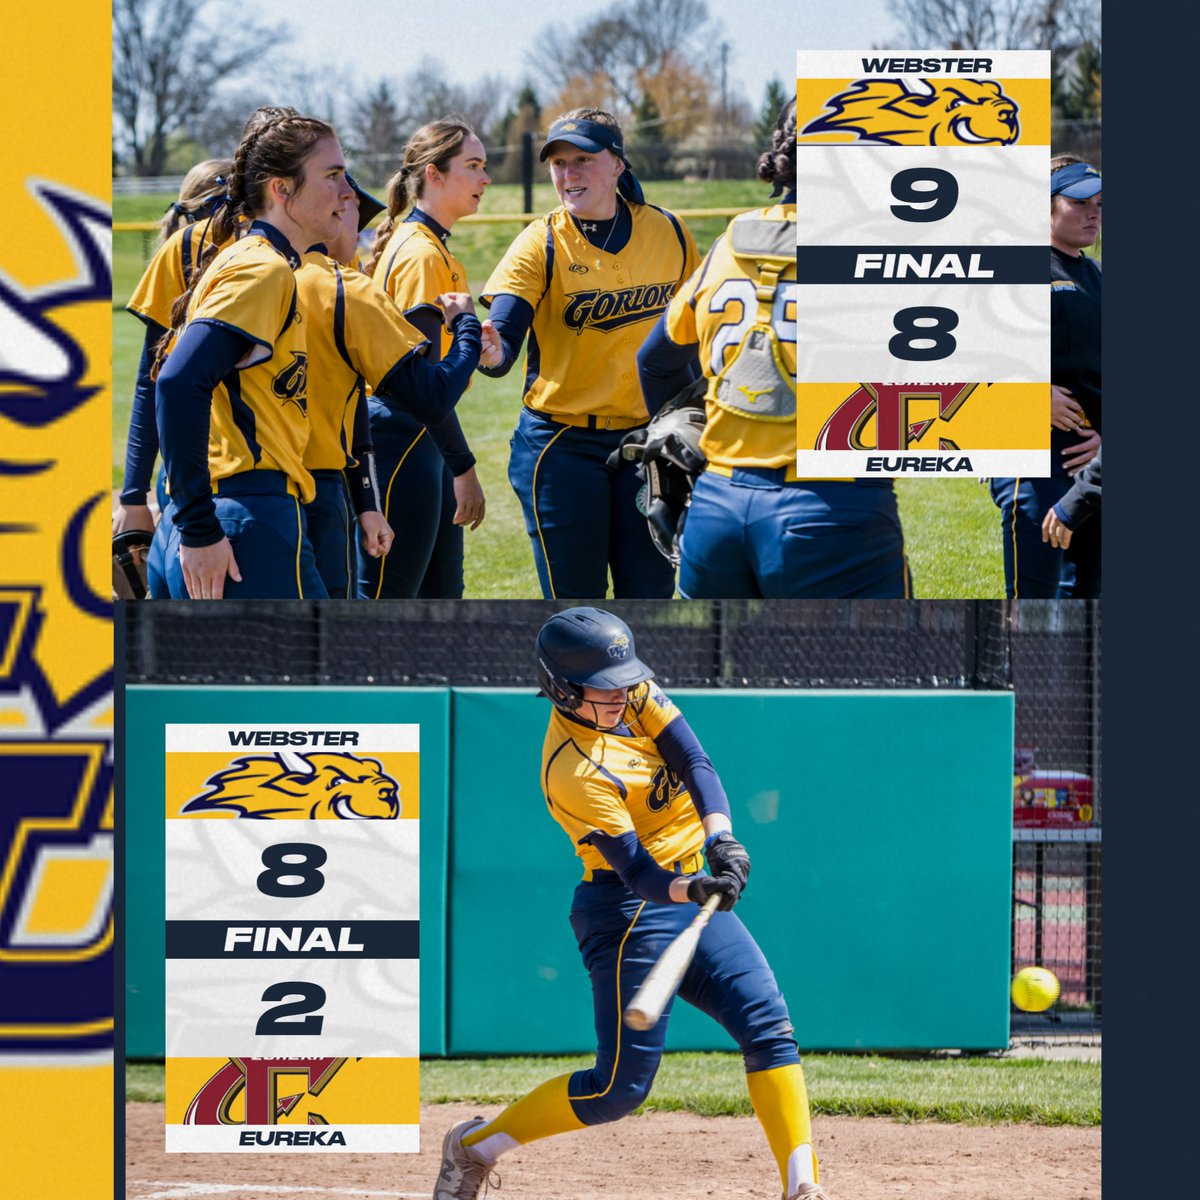 GORLOKS SWEEP! @GorloksSoftball improves to 2-0 in @SLIAC play to move to 15-7-1 on the season! They are back home next Sunday for a DH against Lyon! @websteru @WebsterUNews #LokNation